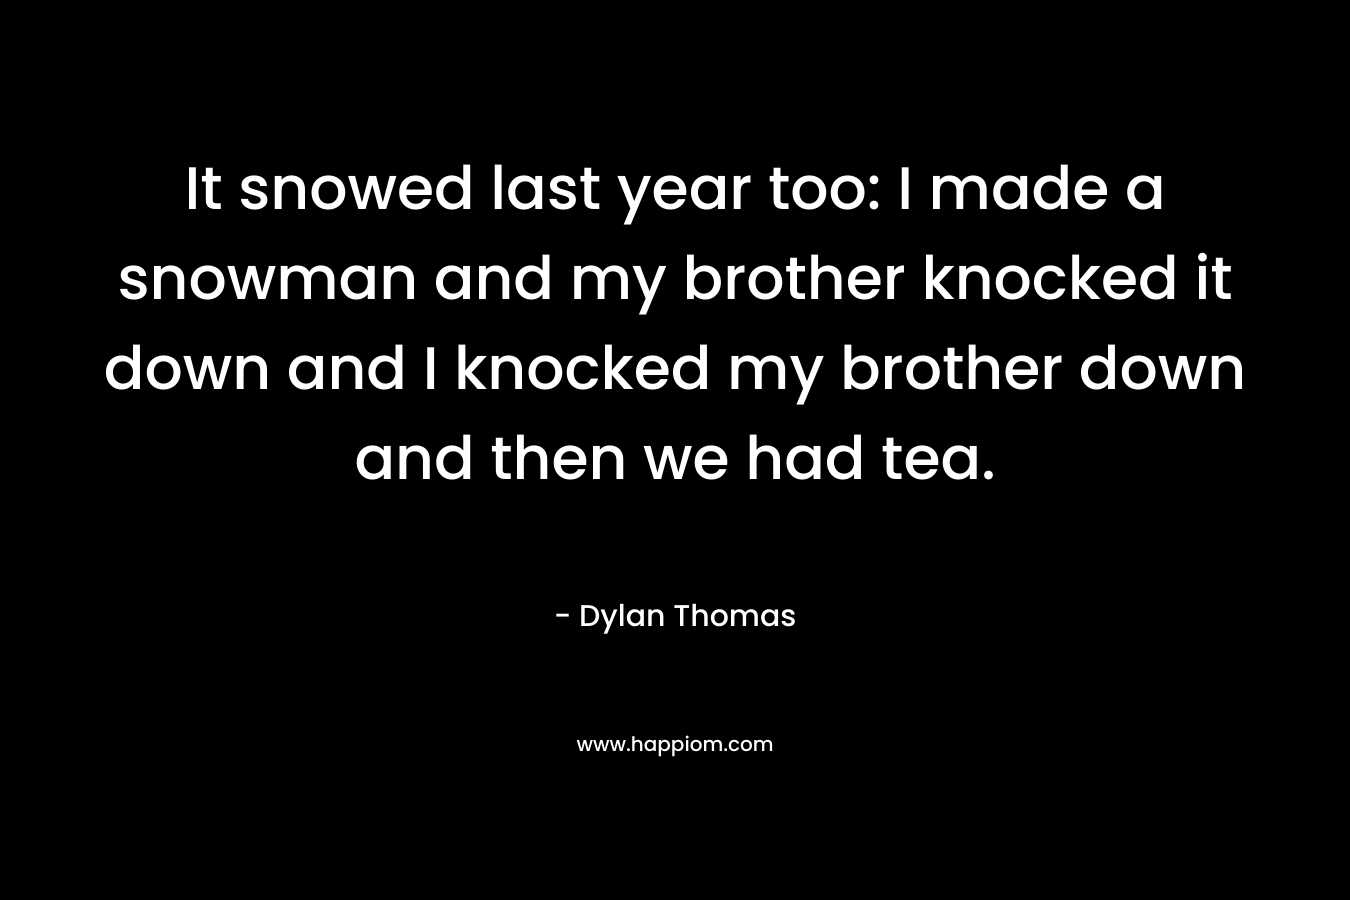 It snowed last year too: I made a snowman and my brother knocked it down and I knocked my brother down and then we had tea. – Dylan Thomas